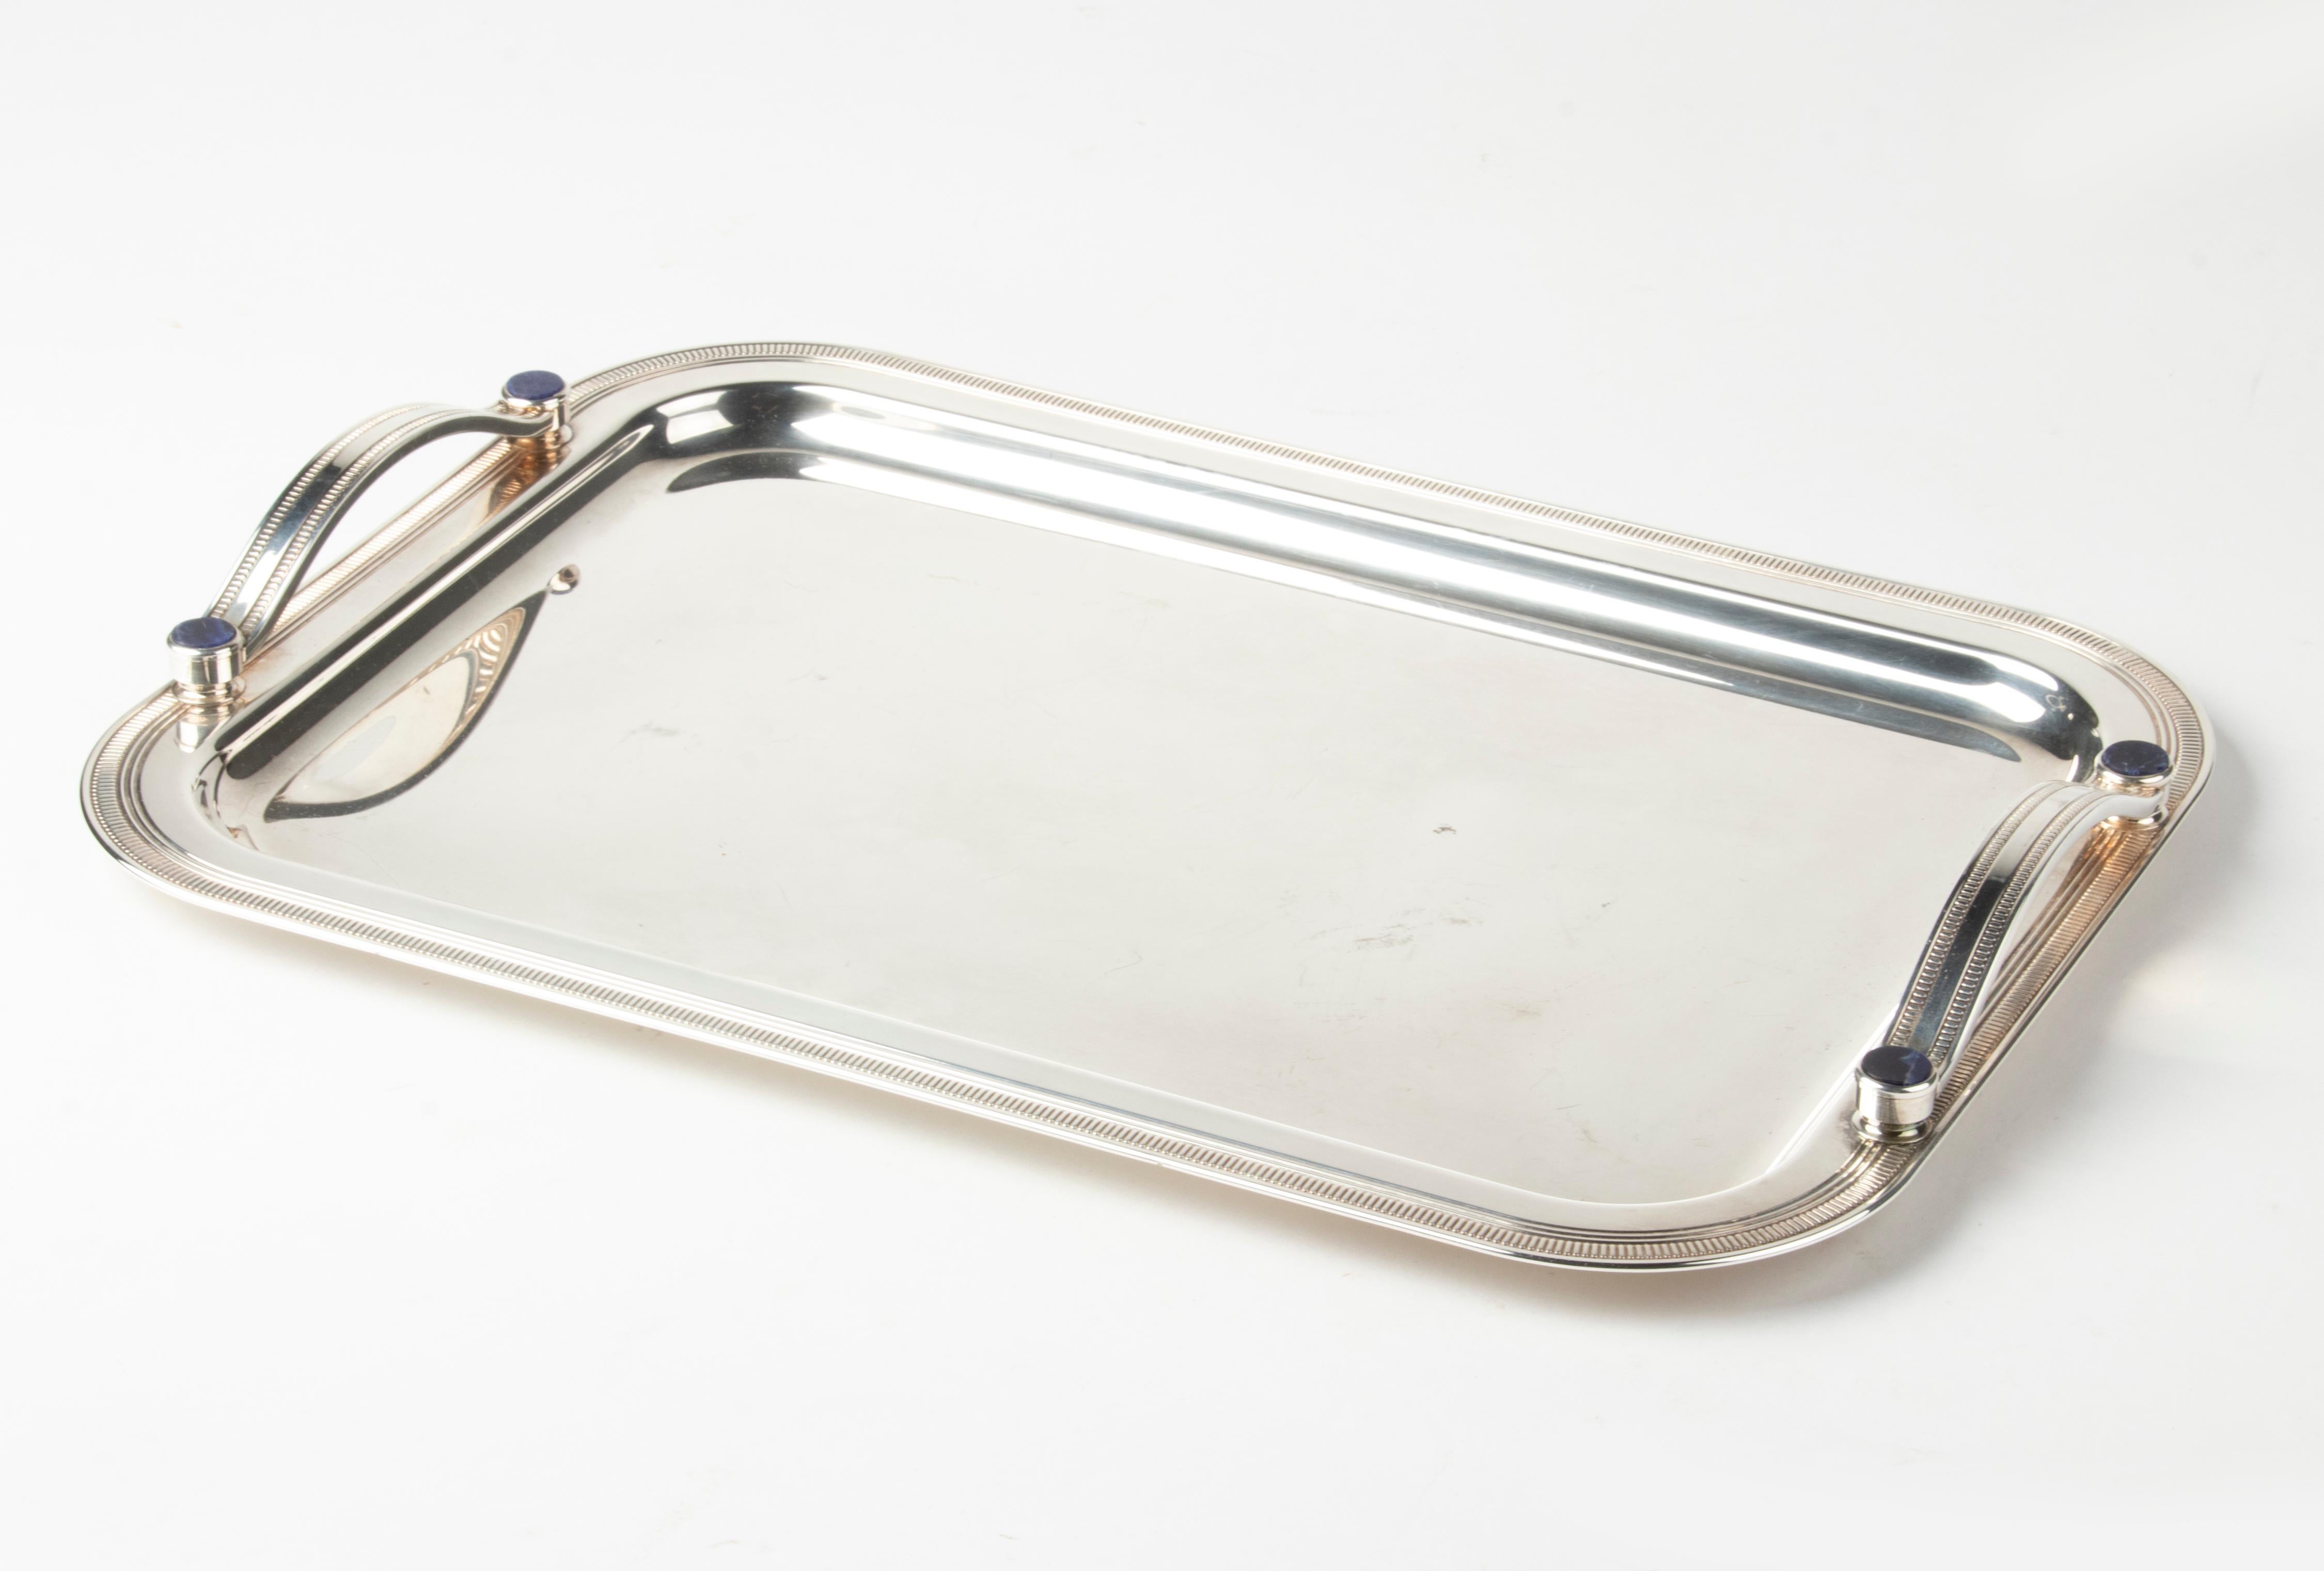 Beautiful silver plated tray from the Italian brand Maestri. At the handles, the tray is inlaid with lapis lazuli stones.
The tray is in very good condition. Marked on the bottom.